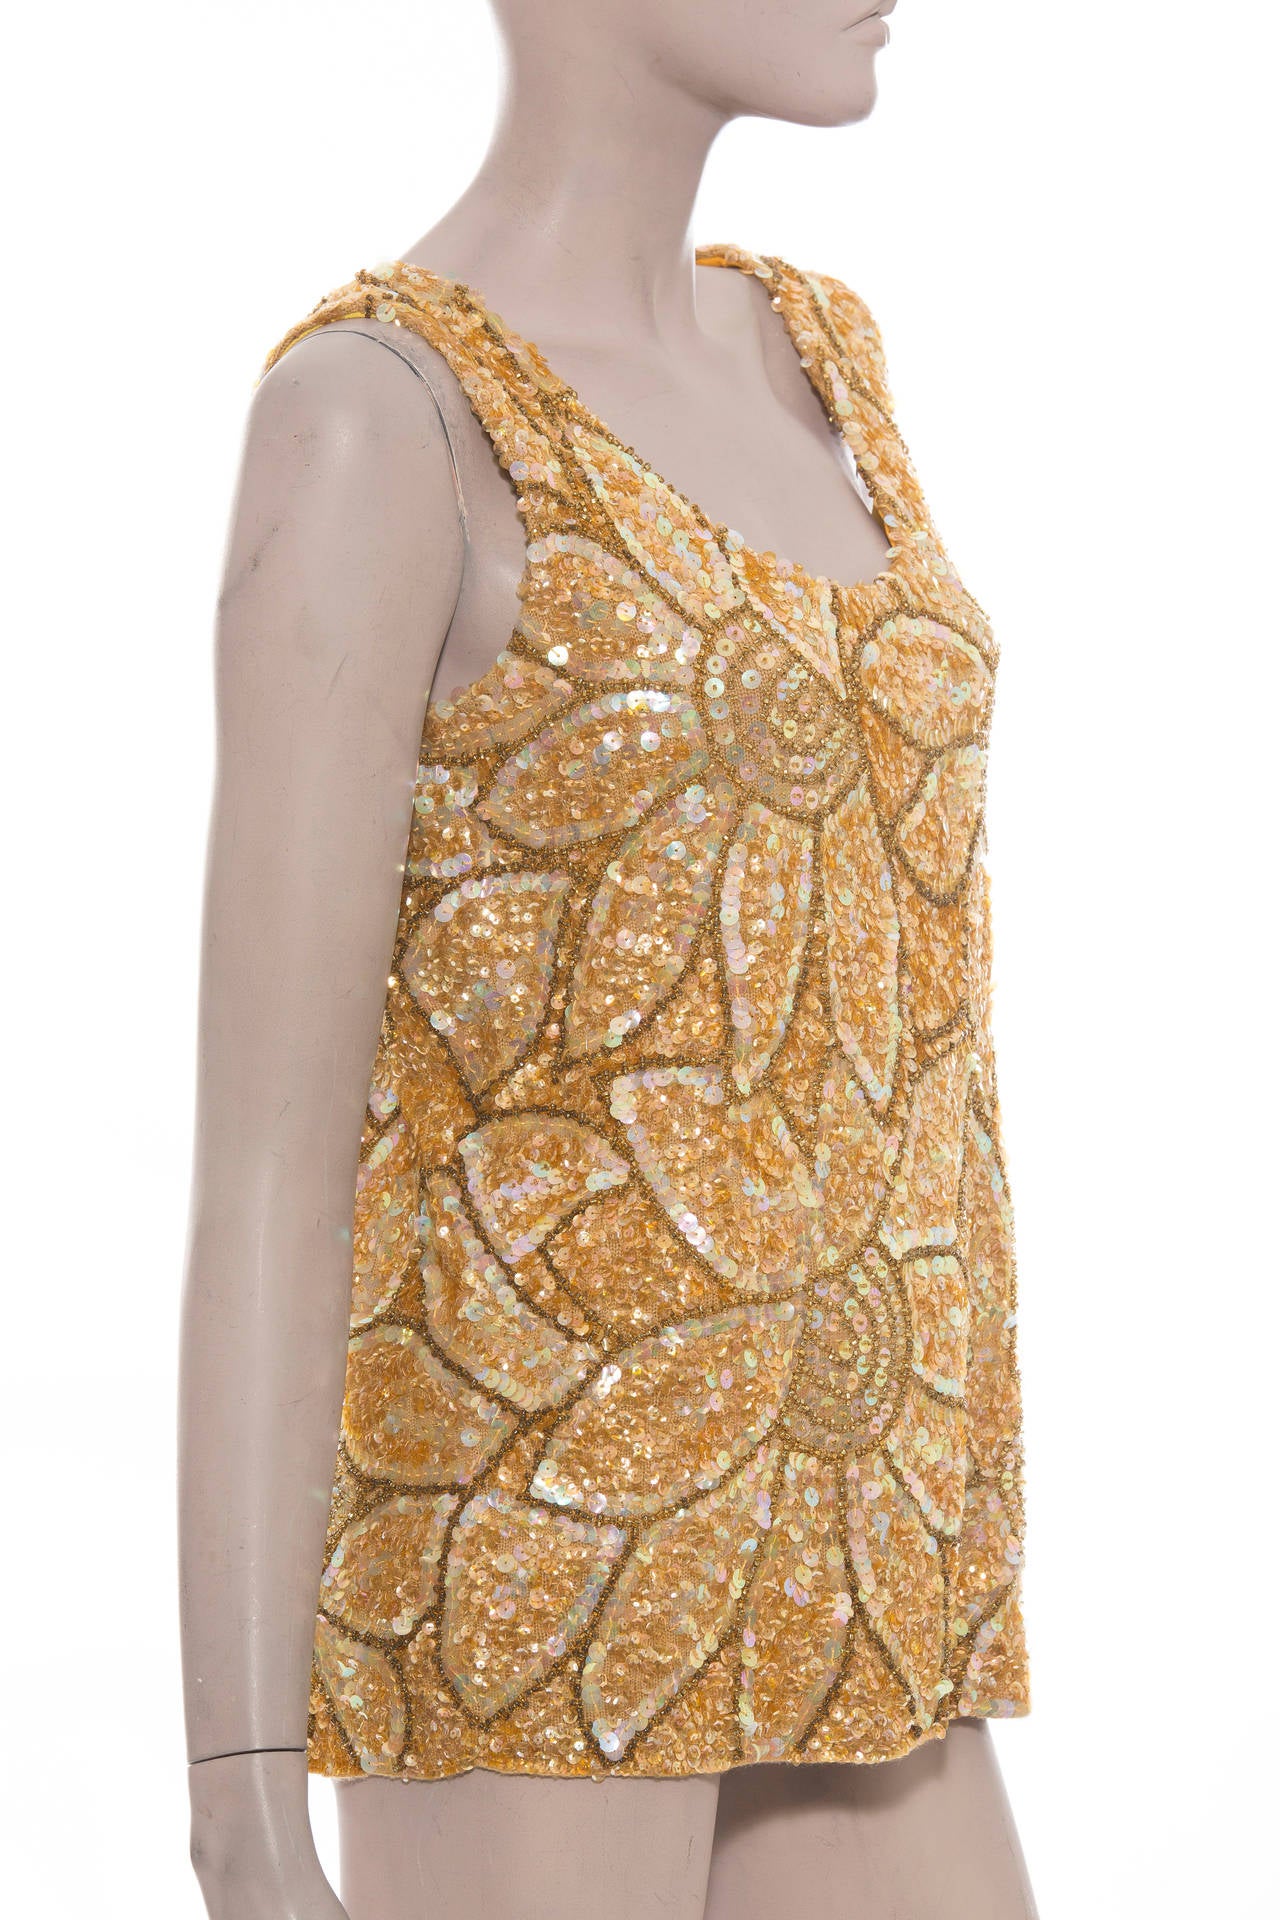 Brown Gene Shelly's Boutique International Knit Sequined Dress And Top, Circa 1960 For Sale